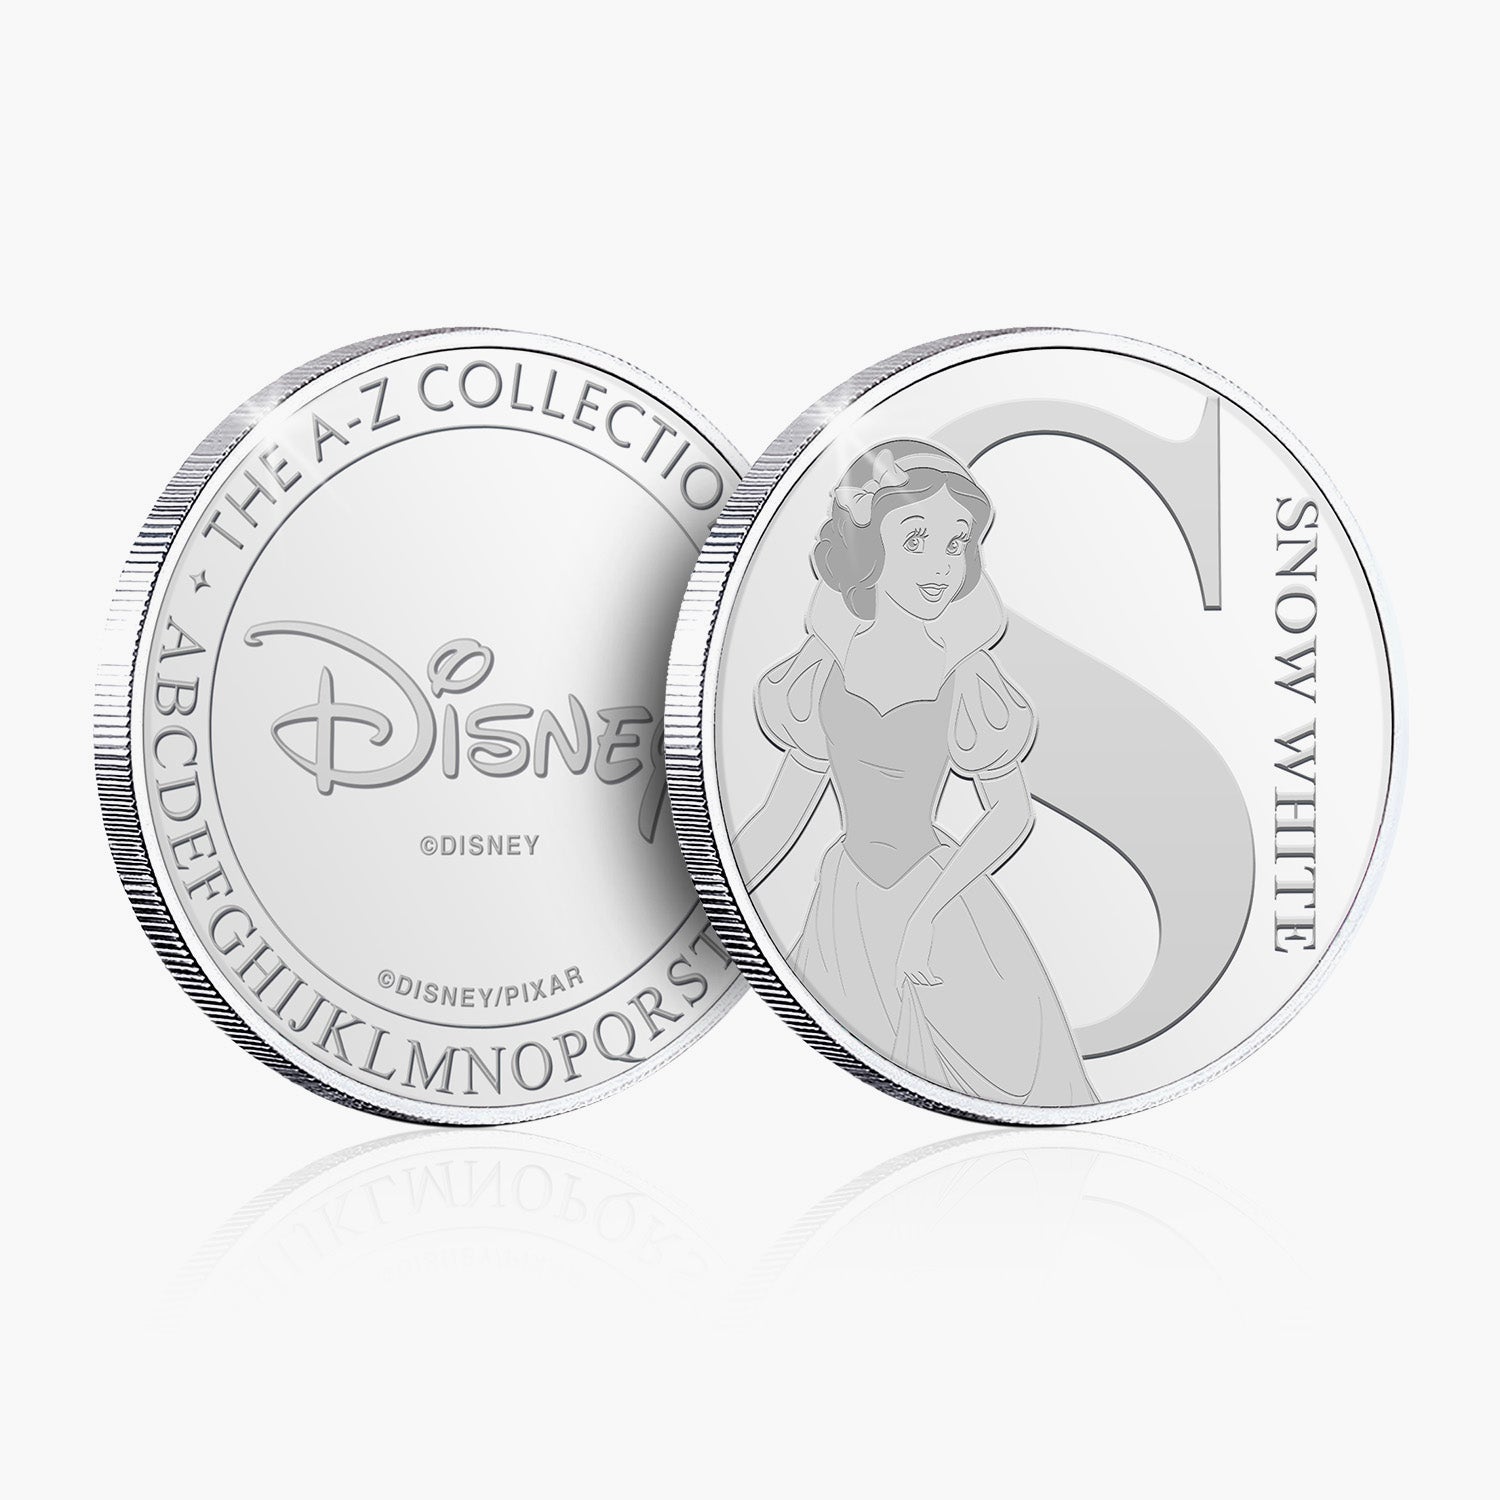 S Is For Snow White Silver-Plated Commemorative